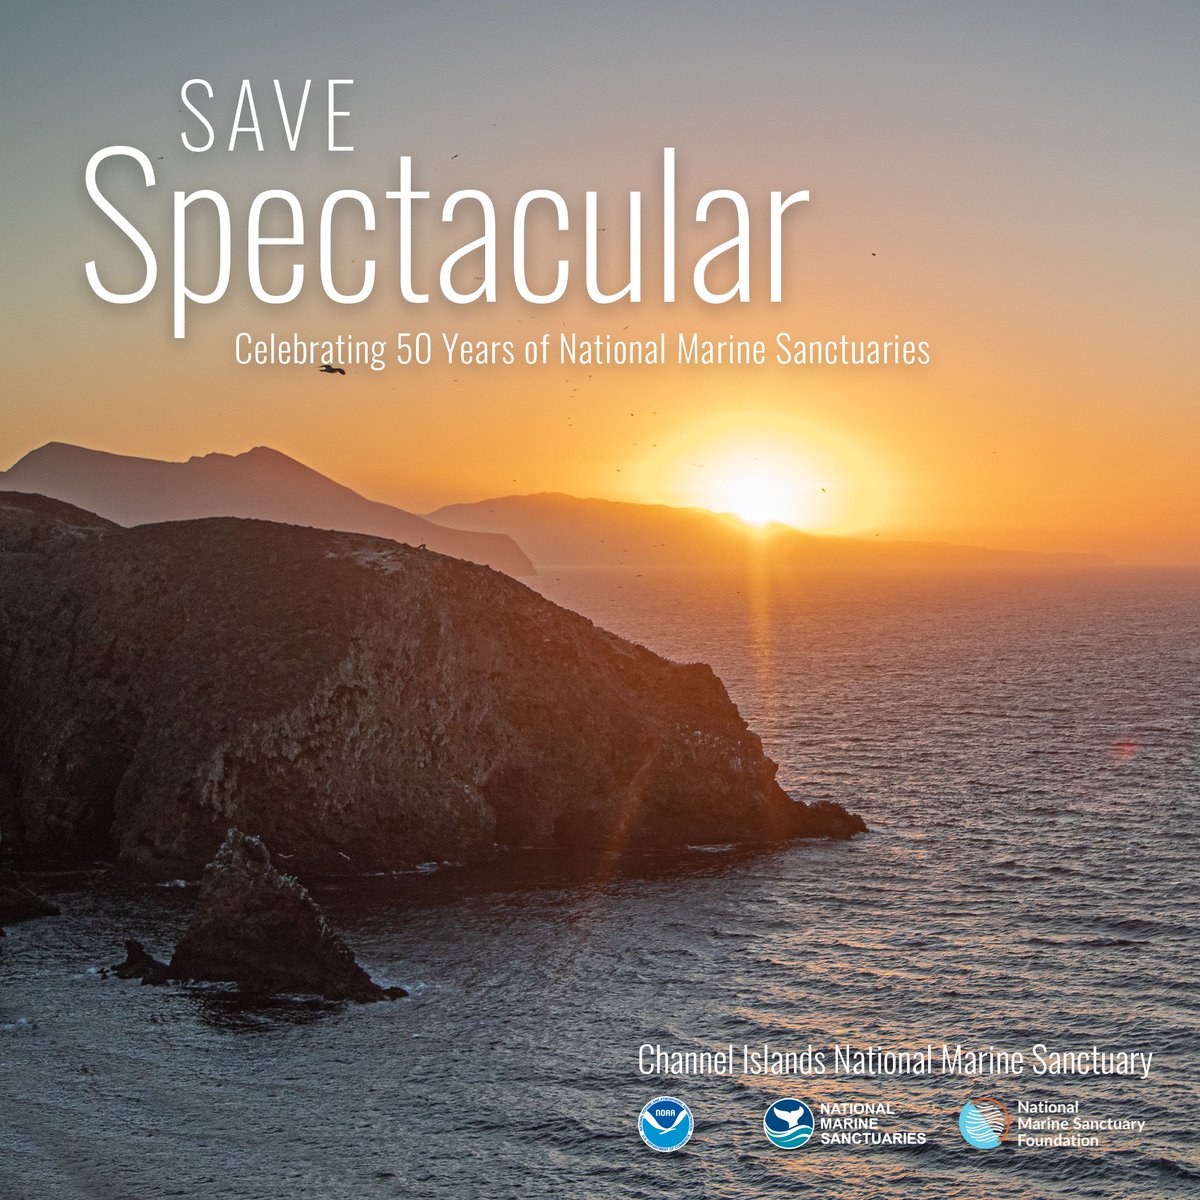 Join us in #SaveSpectacular and celebrate 50 years of marine sanctuaries this October 23rd! Our sanctuaries bring us closer to each other and to the ecosystems that uphold our communities and allow us to form lifelong connections with these places! @marinesanctuary  @sanctuaries